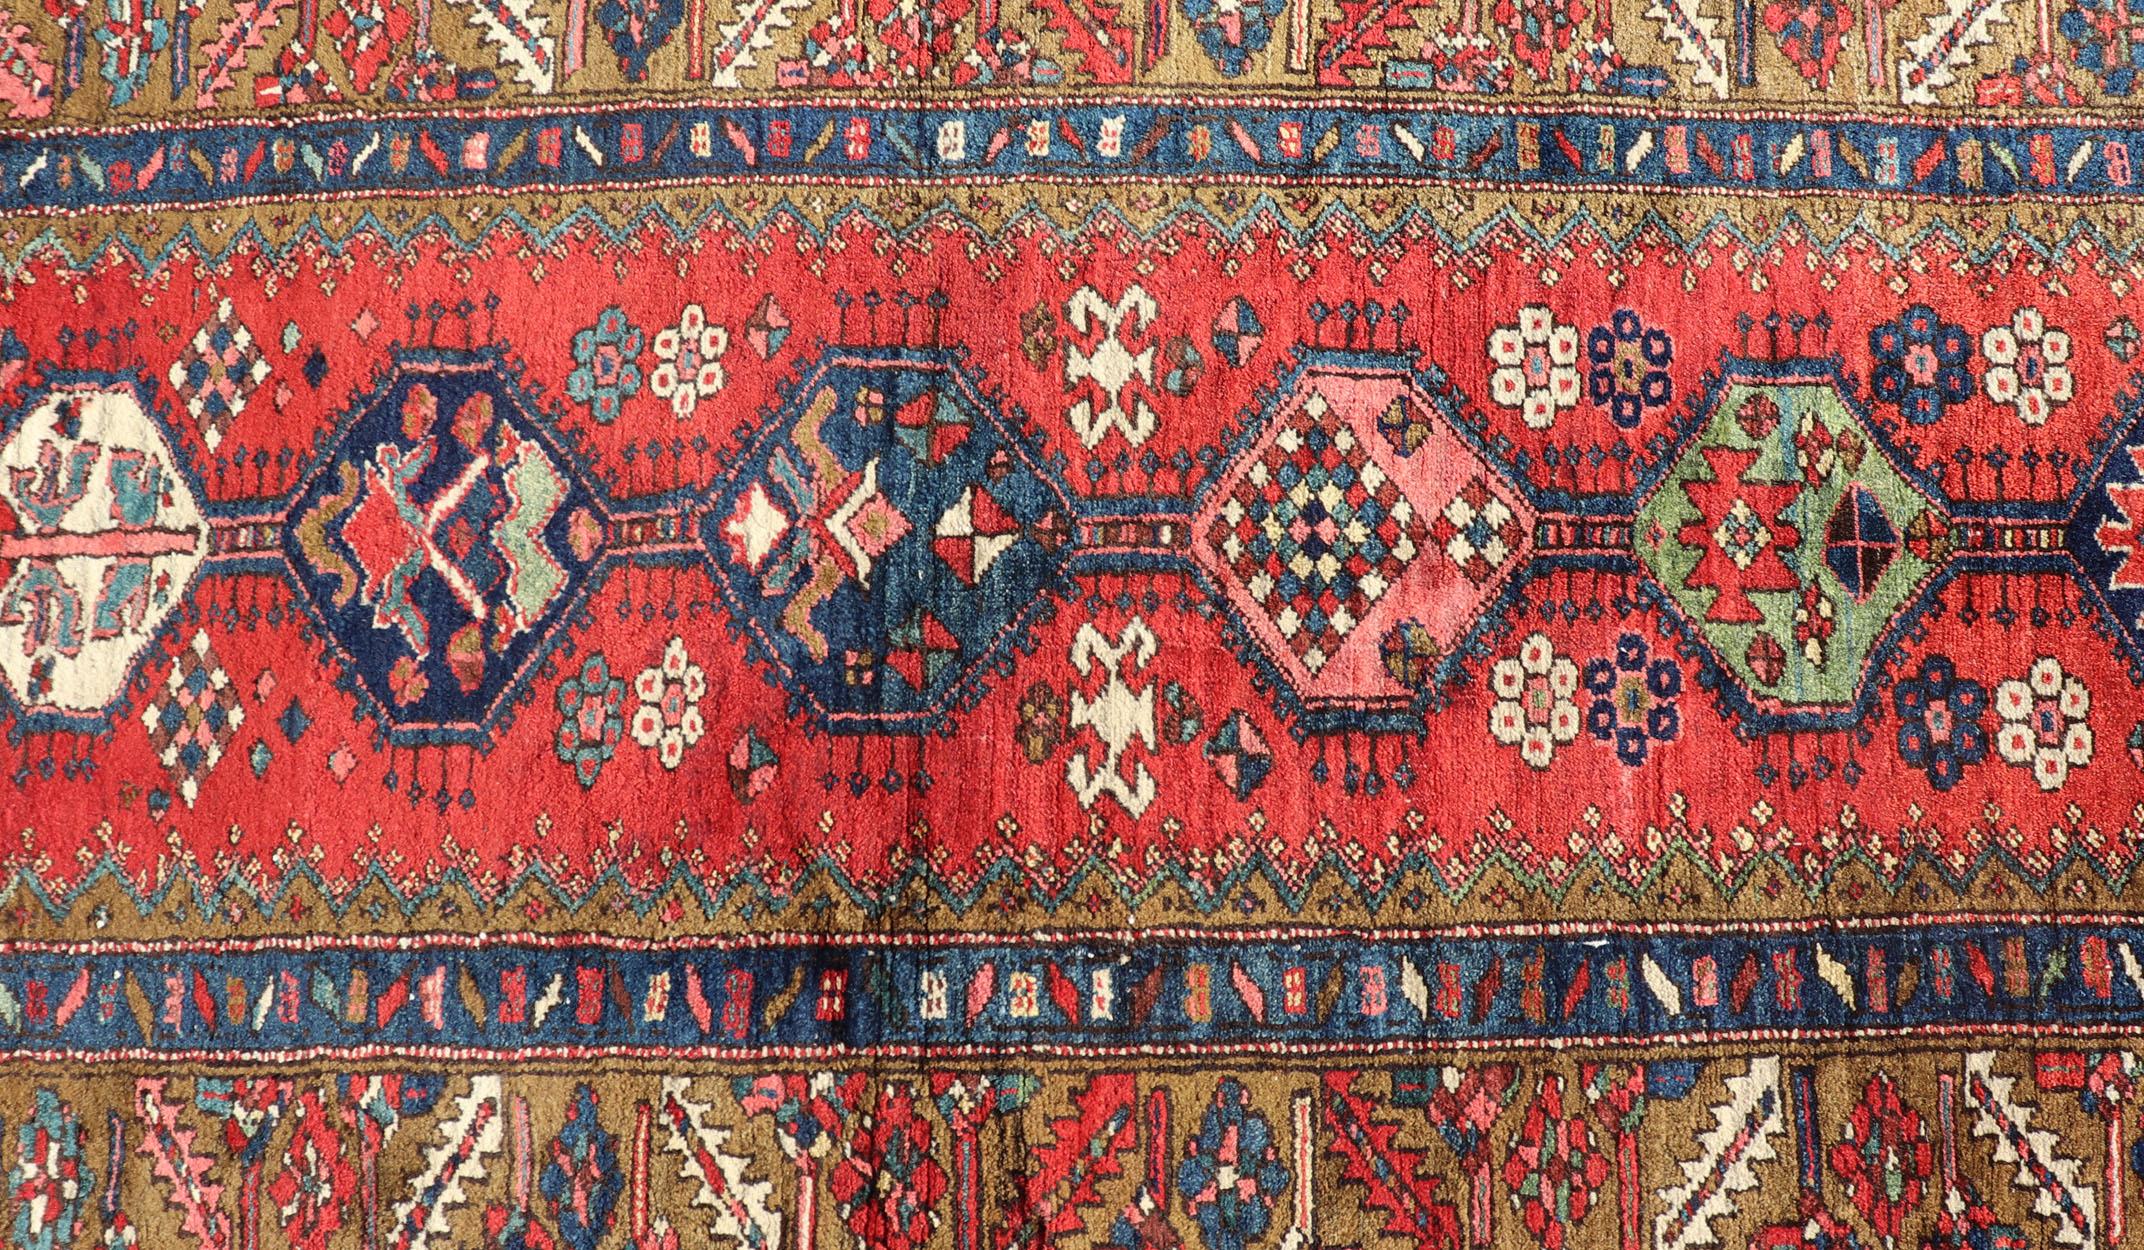 This gorgeous antique Persian Heriz runner features a red background imbued with ornate medallions running along the piece. Sub-geometric designs decorate the field, and an intricate multi-tiered border surrounds the entirety of the piece. Colors